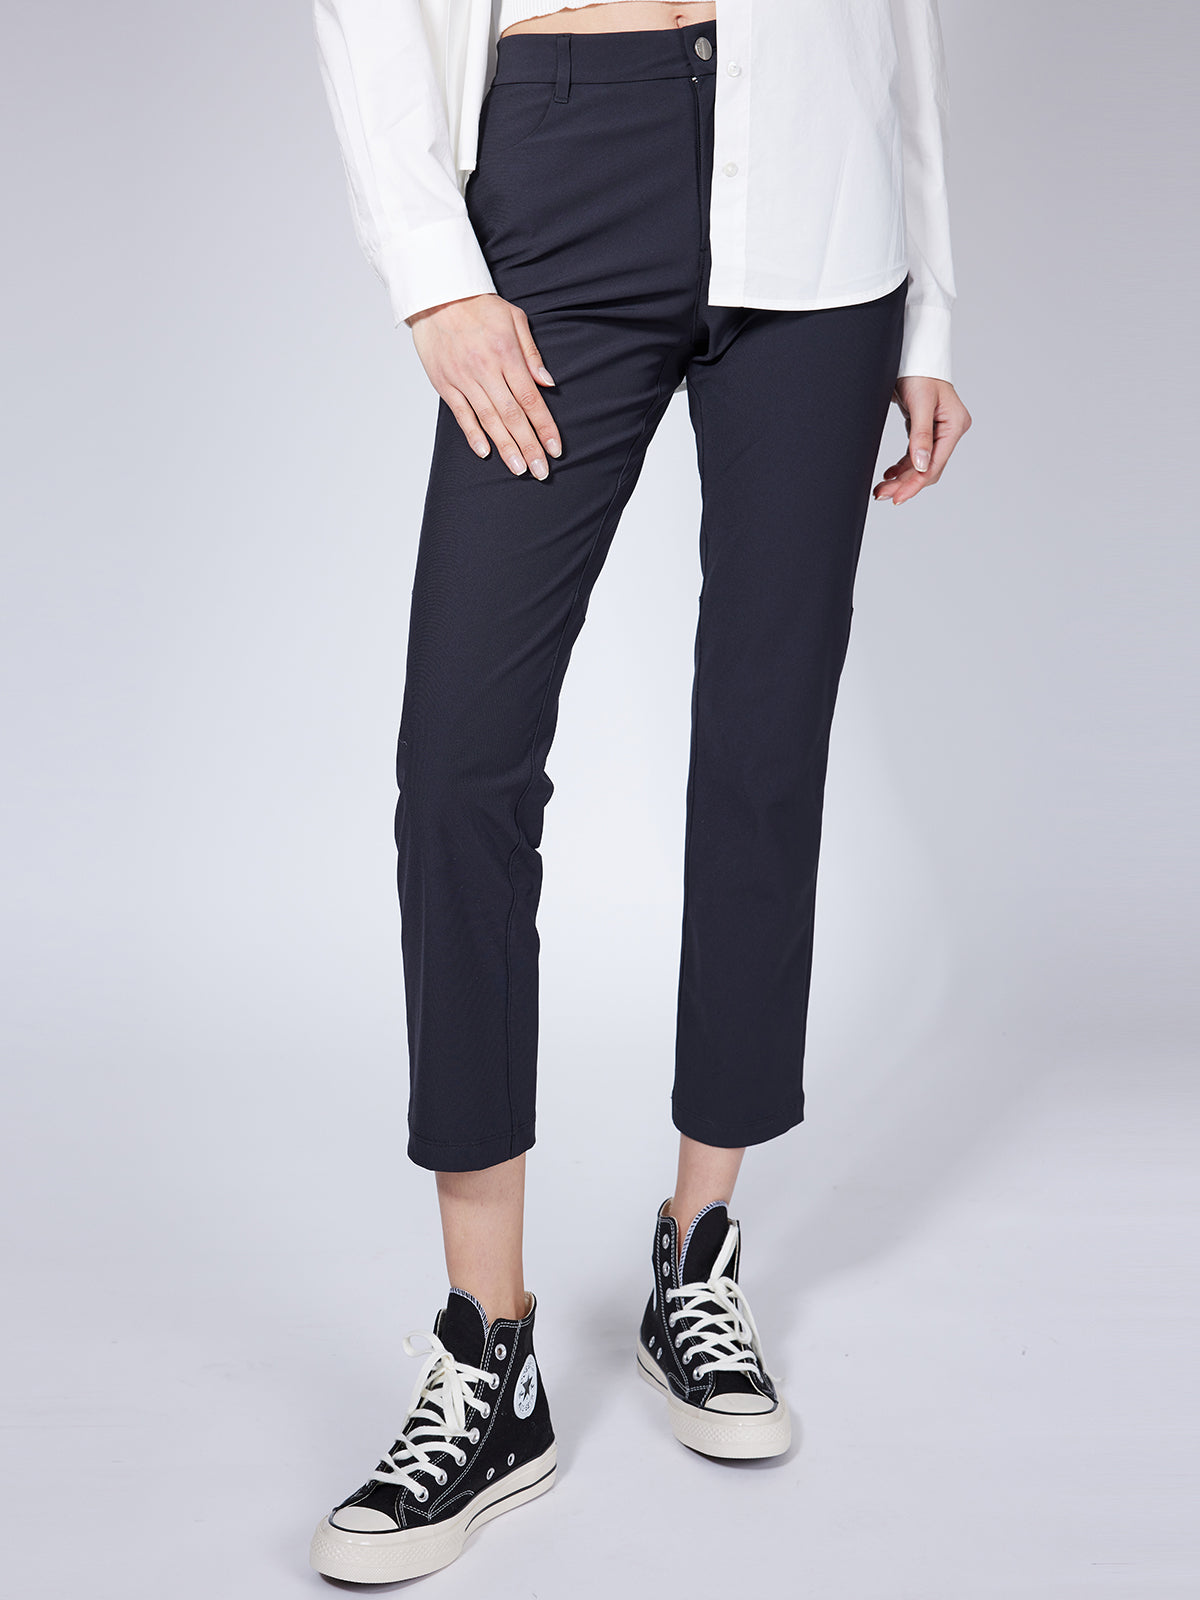 Relaxed Fit Wrinkle Free Straight Leg Pants